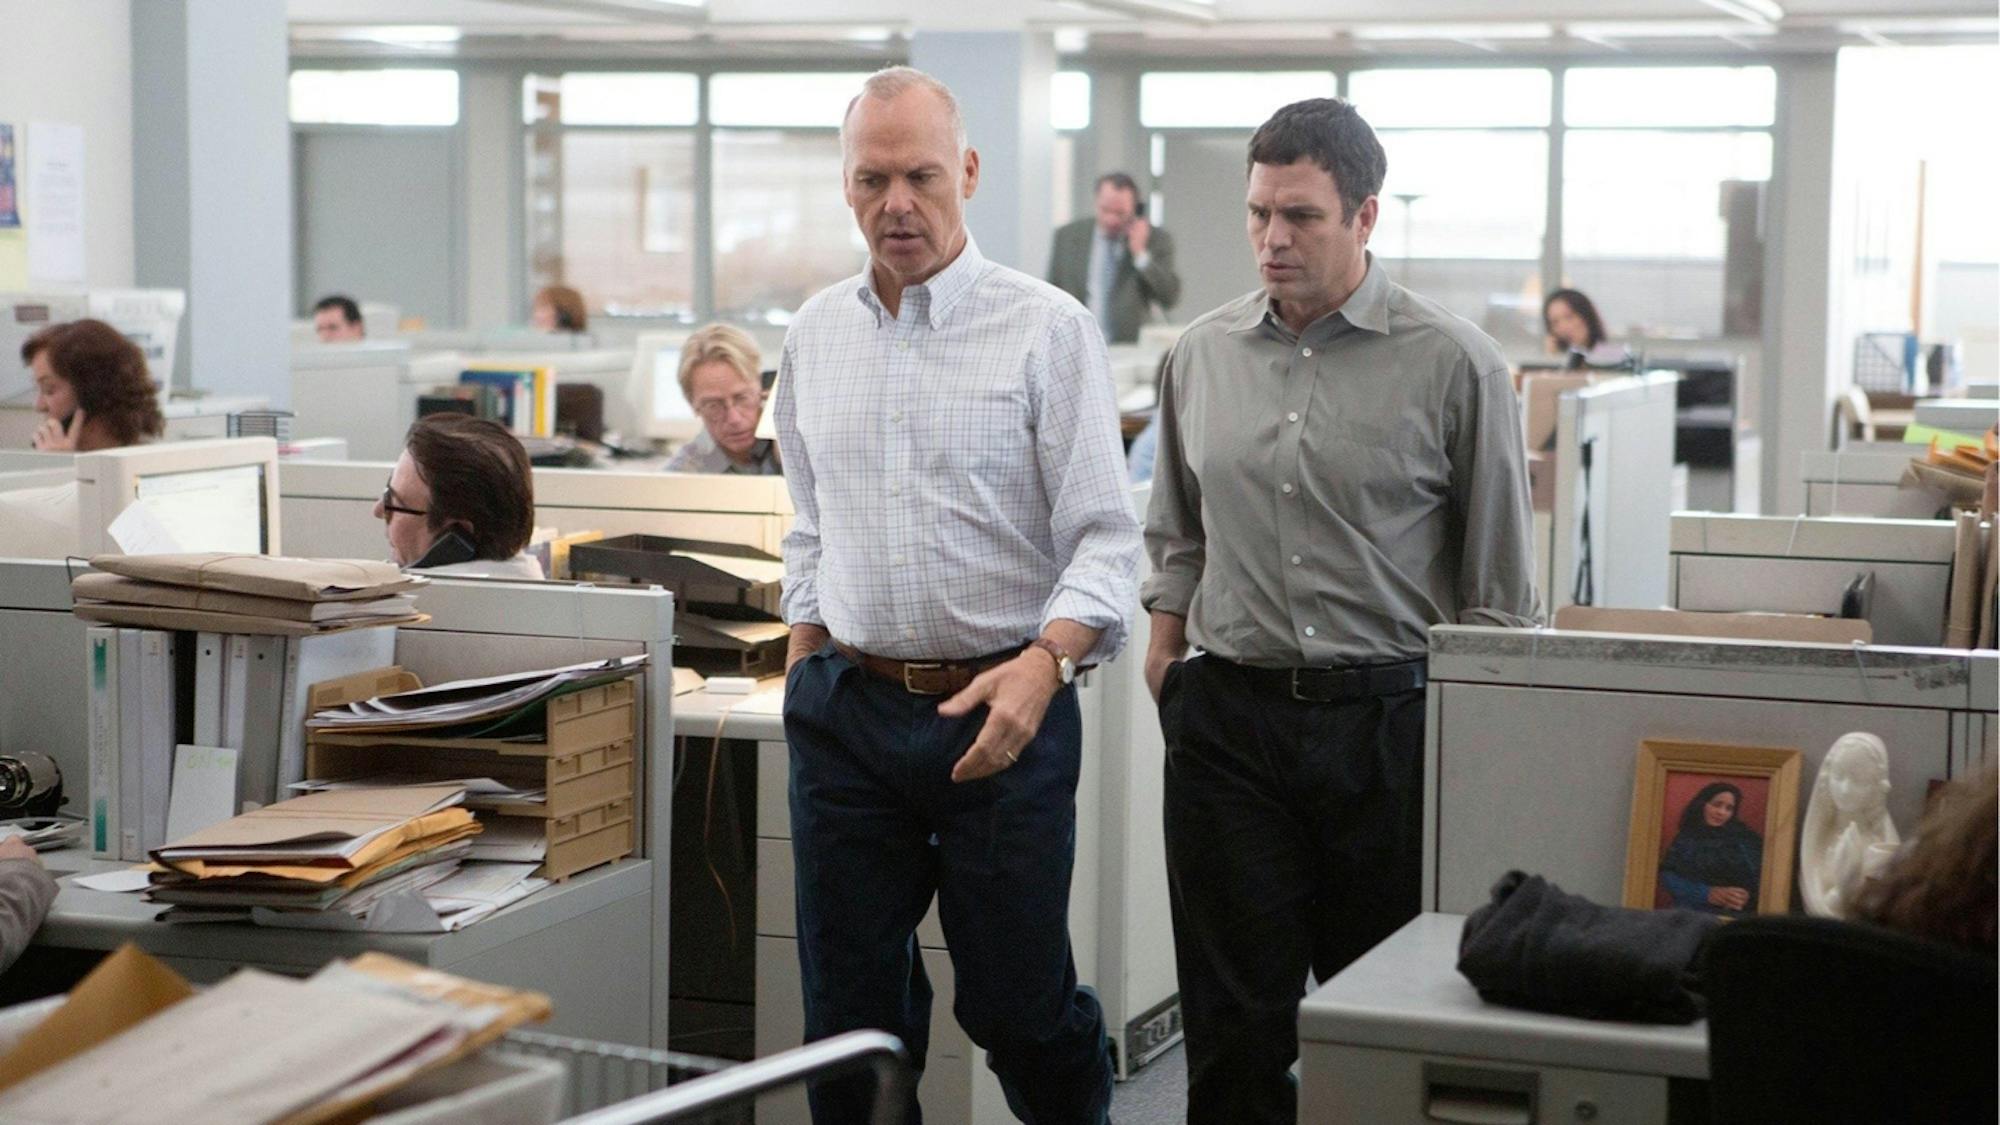 Walter Robinson (Michael Keaton) and Mike Rezendes (Mark Ruffalo) in Spotlight stand in an office space walking between cubicles.